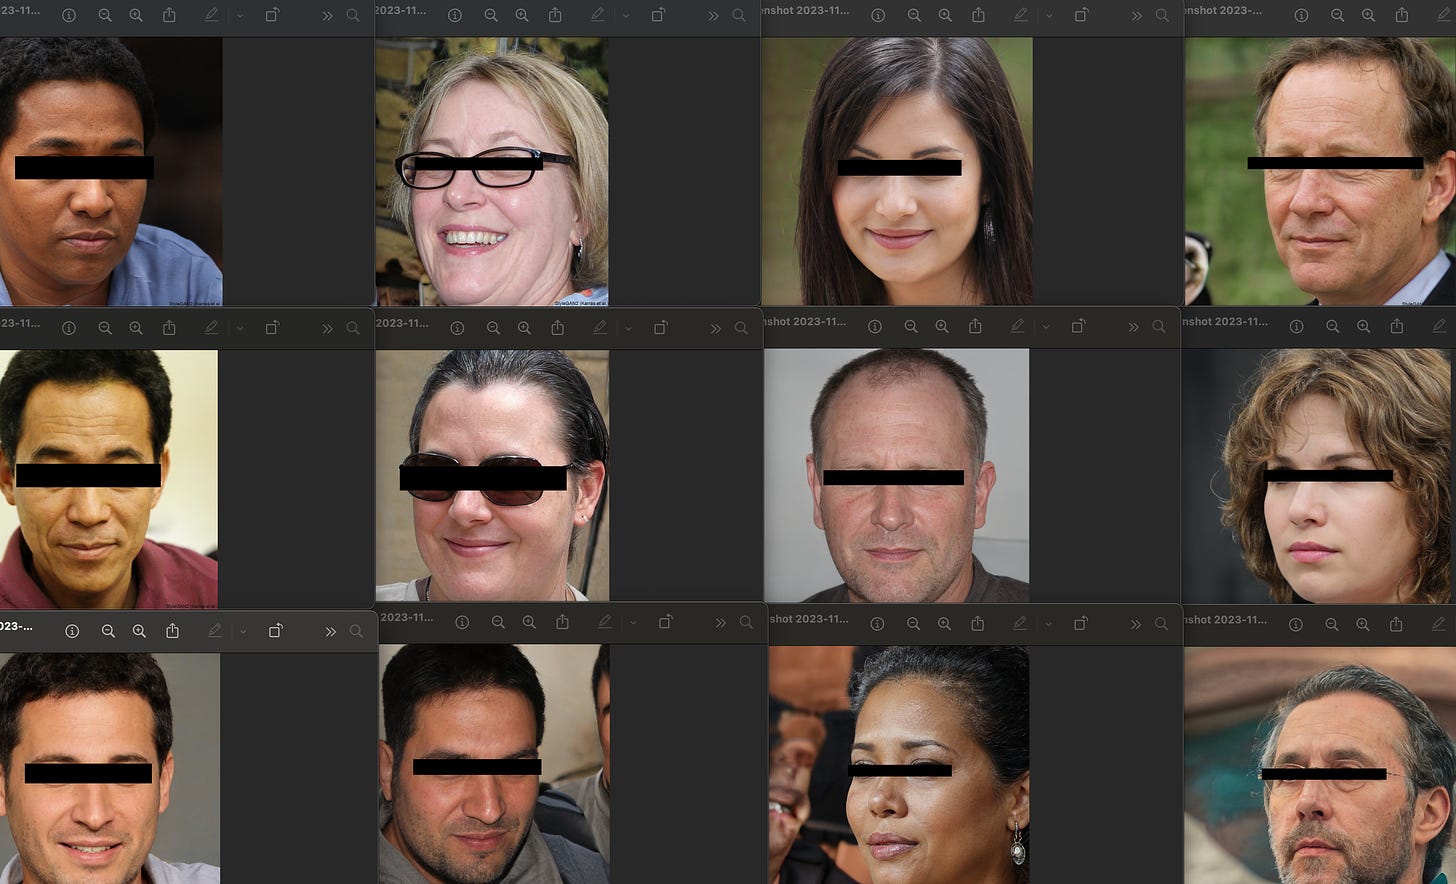 Grid of 12 images of human faces with the eyes covered up by a black bar